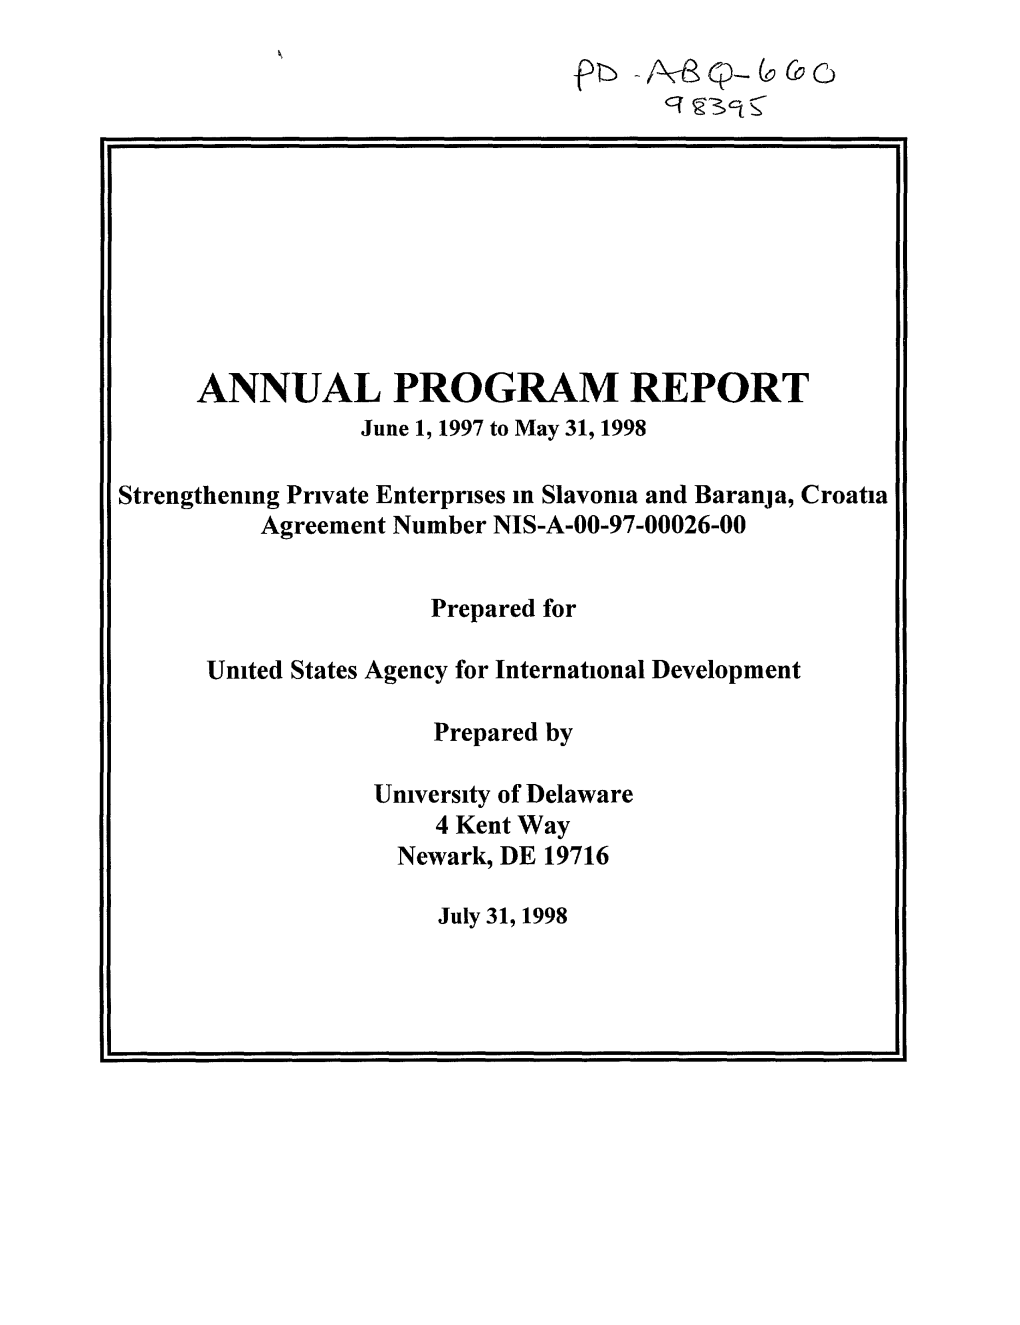 ANNUAL PROGRAM REPORT June 1,1997 to May 31,1998